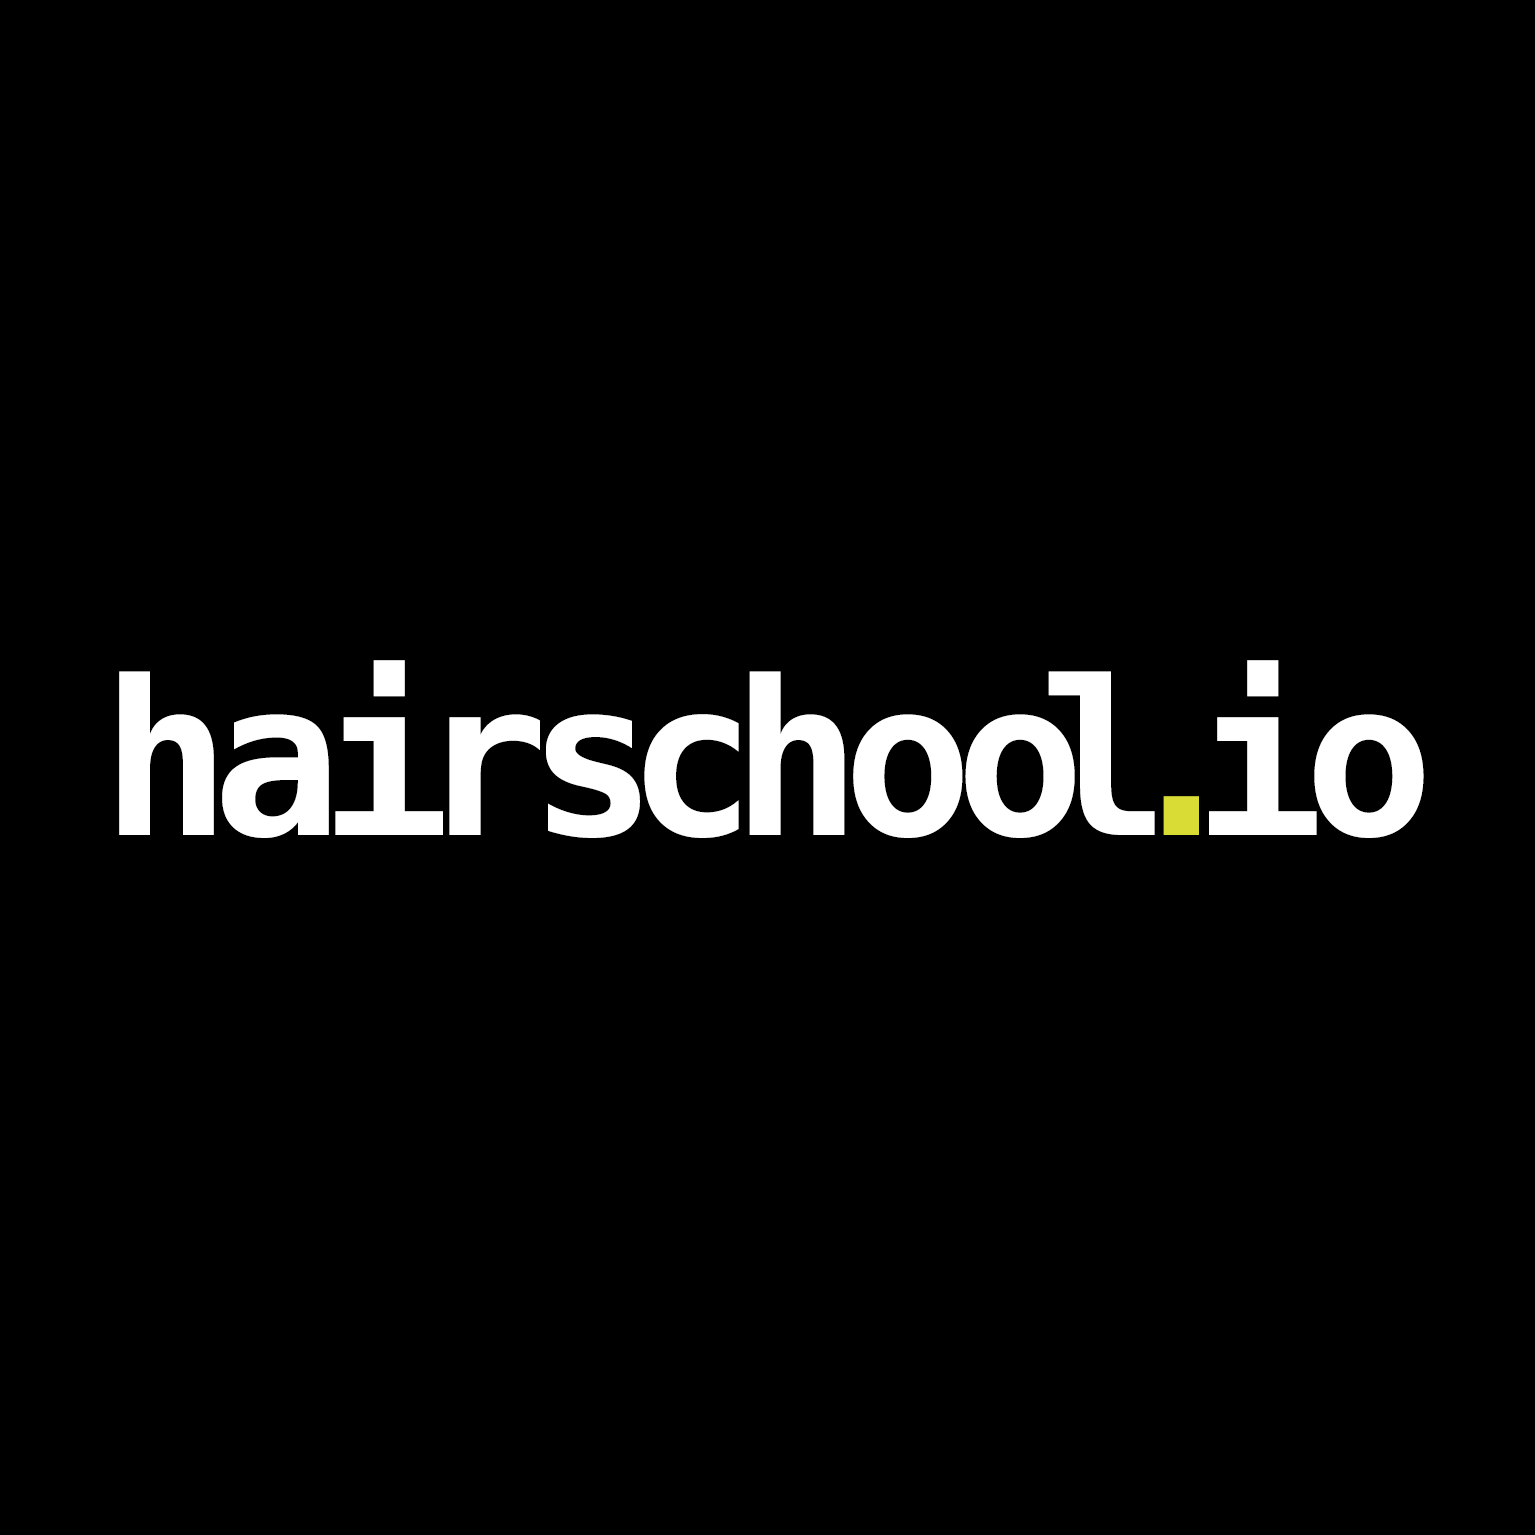 Logo Absolutely, thank you for the updates. Here's the revised business overview:

Hairschool.io is an online learning platform specializing in high-quality video tutorials for professional hairdressers and stylists. Our teachings are rooted in the exceptional craft of German hairstyling and are brought to life by some of the world's best hairstylists, offering an unparalleled learning experience. We currently feature seven video courses available in German, Spanish, and English. Our vision is to become the global leader in professional hairstyling tutorials, merging the richness of German craftsmanship with the latest trends and styles. These tutorials are executed by the world's finest hairstylists, ensuring a rich and engaging learning experience. Our services cater to a wide spectrum of professionals, from seasoned hairstylists looking to refine their skills further, to aspirants embarking on a successful career in hairstyling.